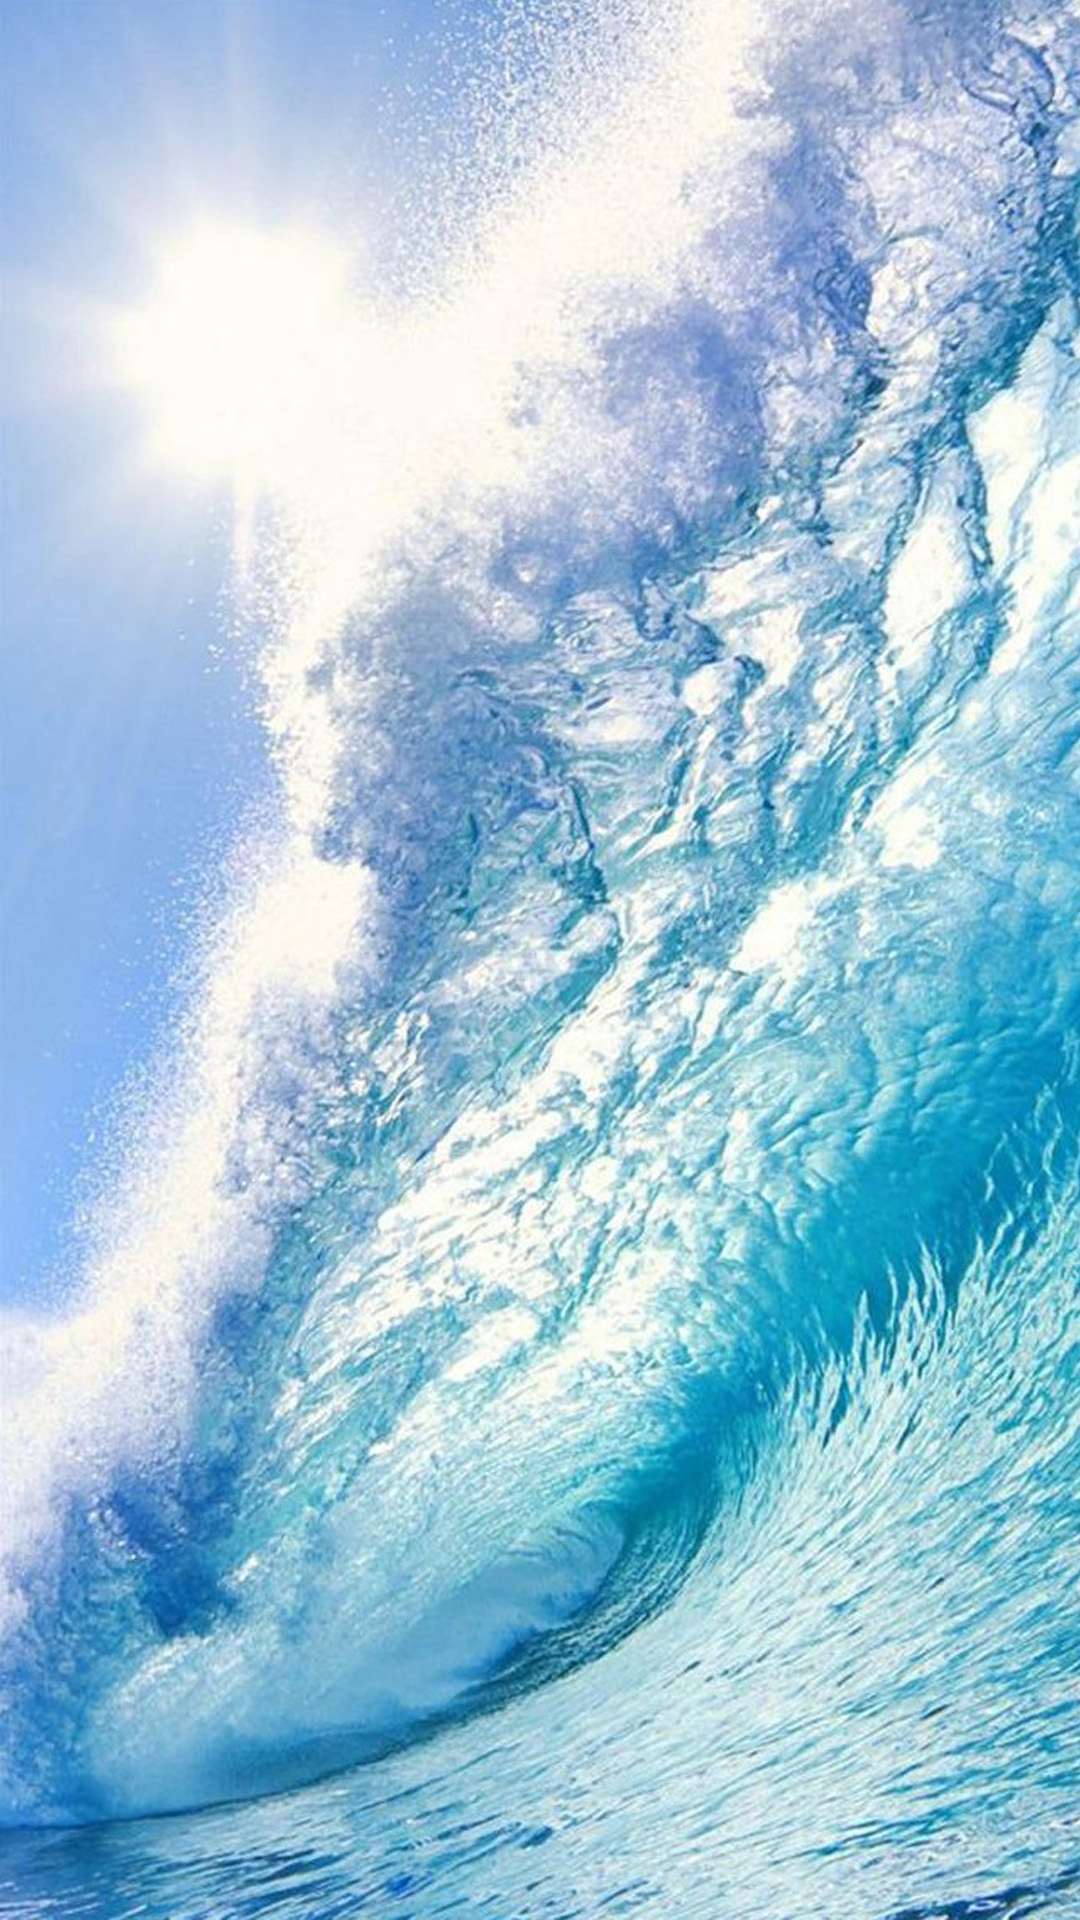 Beach Surf Wave Sea Android Wallpaper